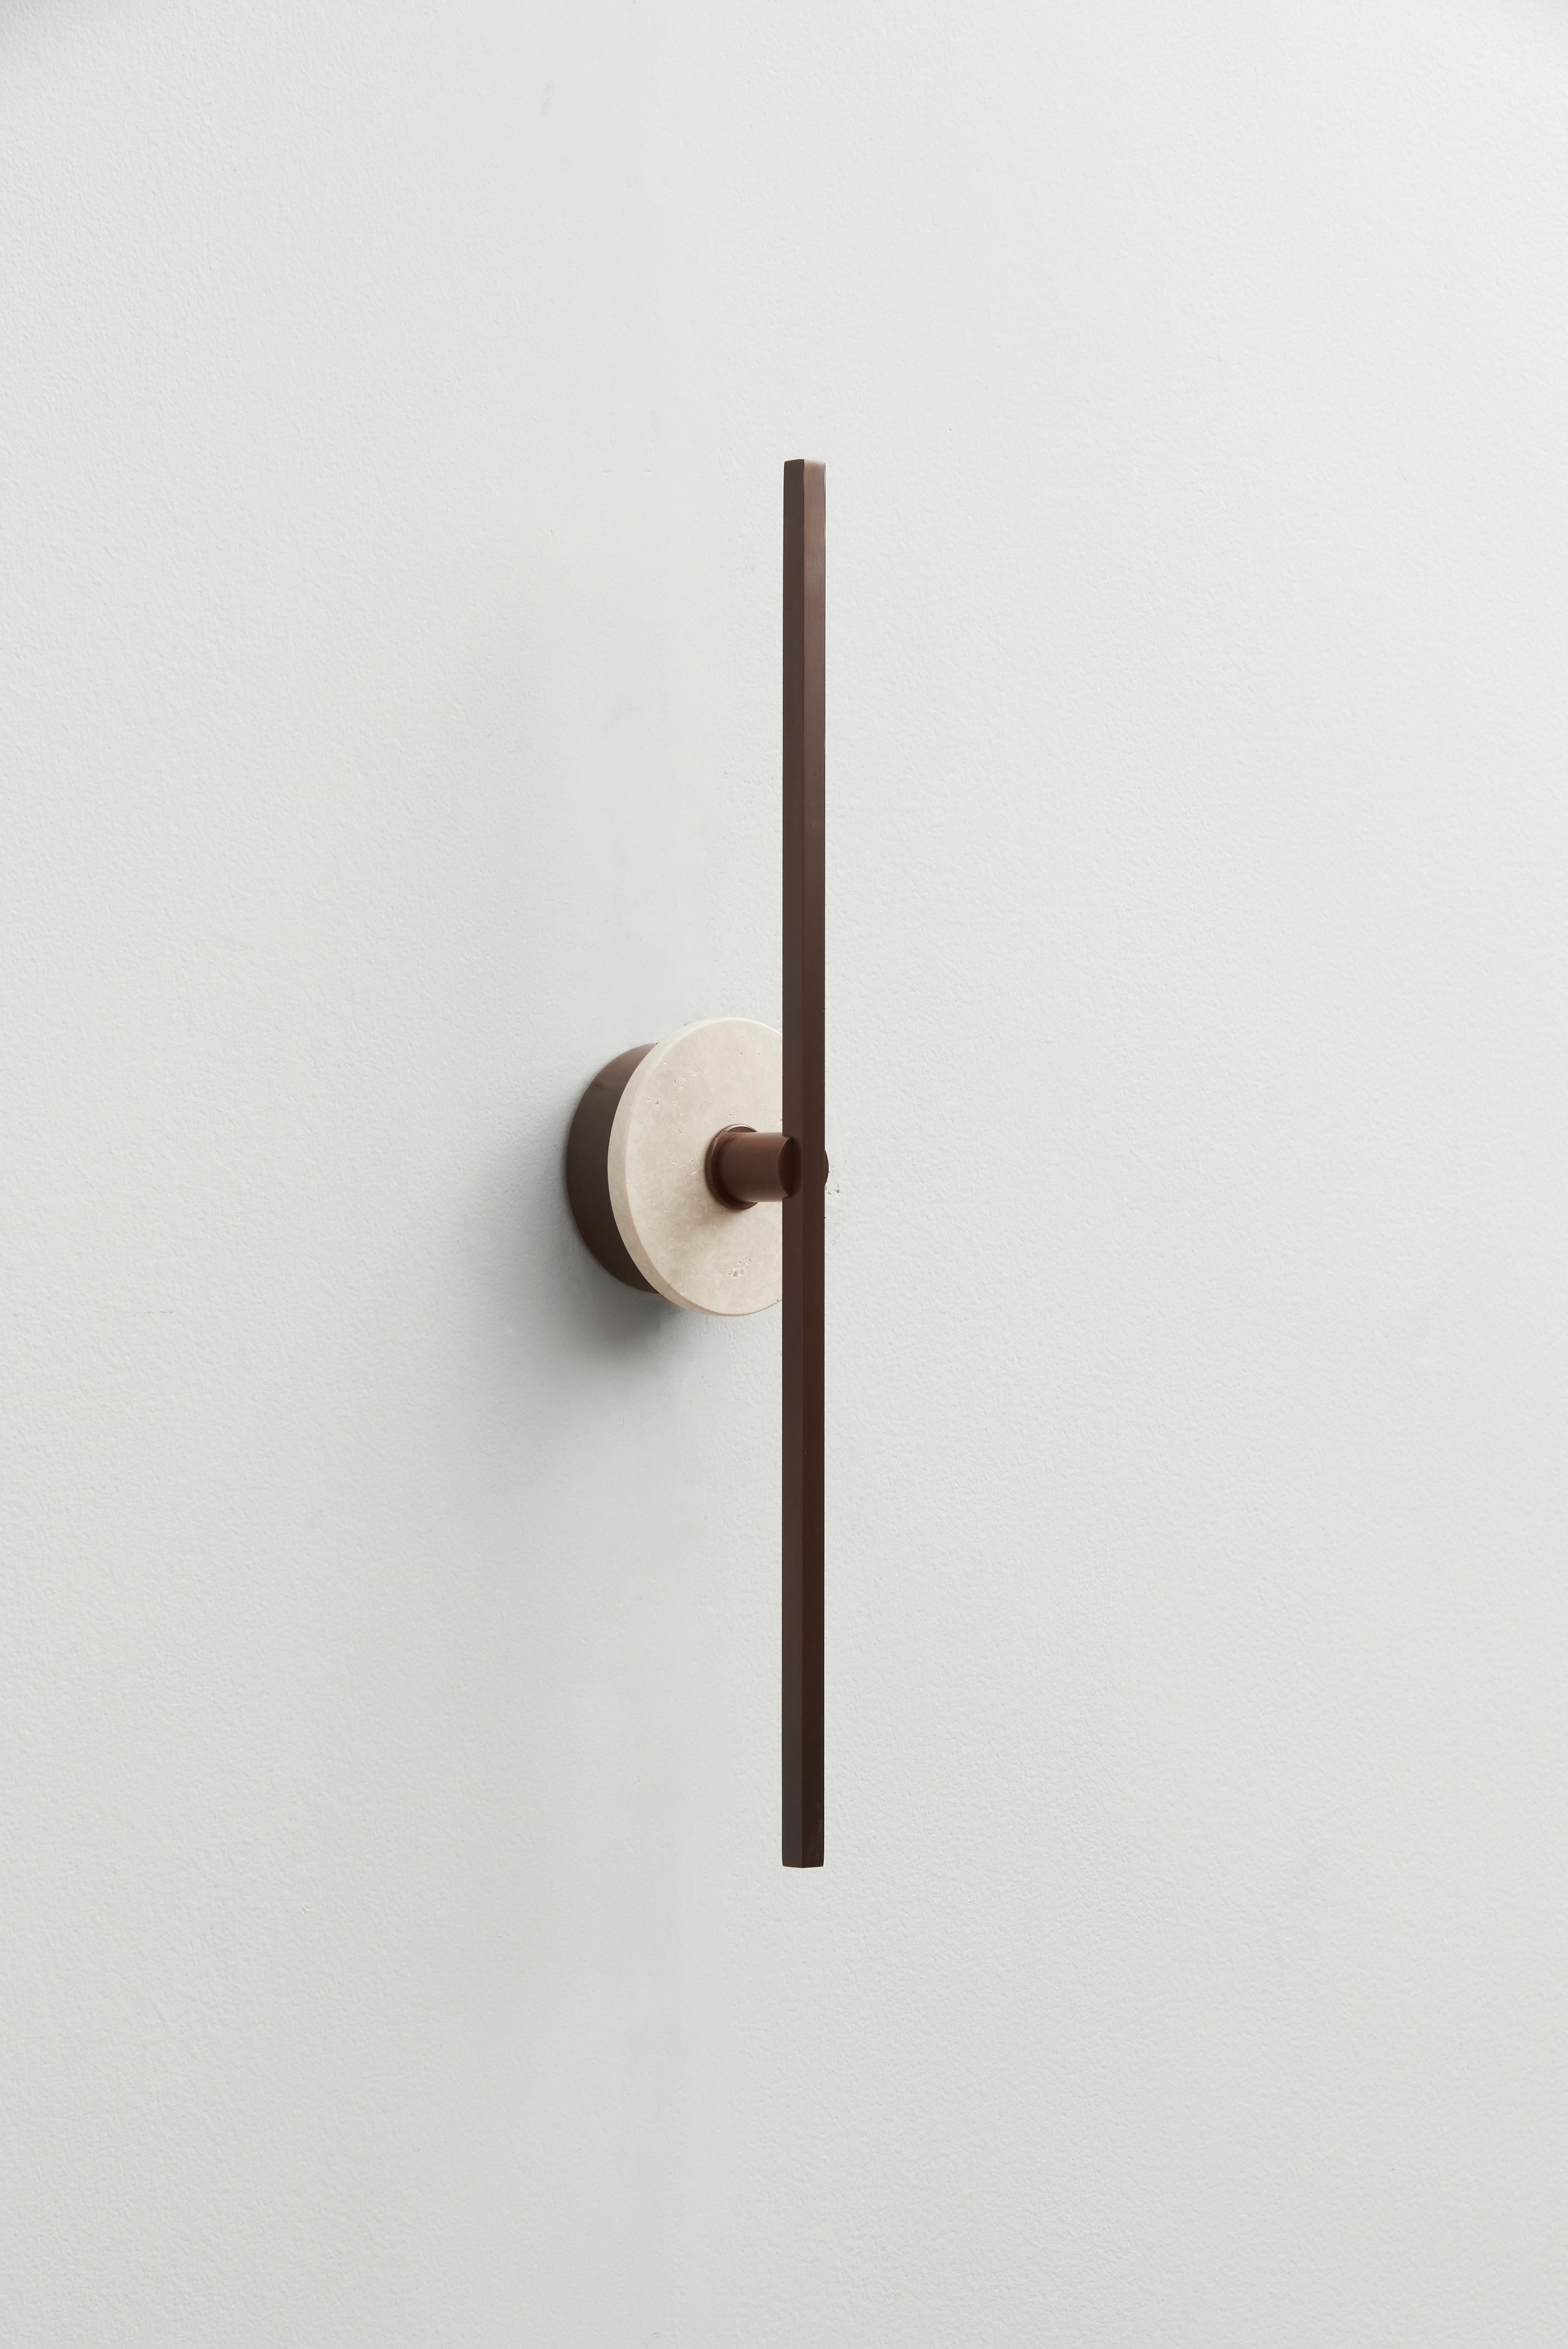 The Stick wall sconce is a visually appealing lighting fixture that combines modern design elements with efficient lighting technology. Its thin bronze profiles and utilization of LED technology contribute to a minimalist aesthetic, making it an